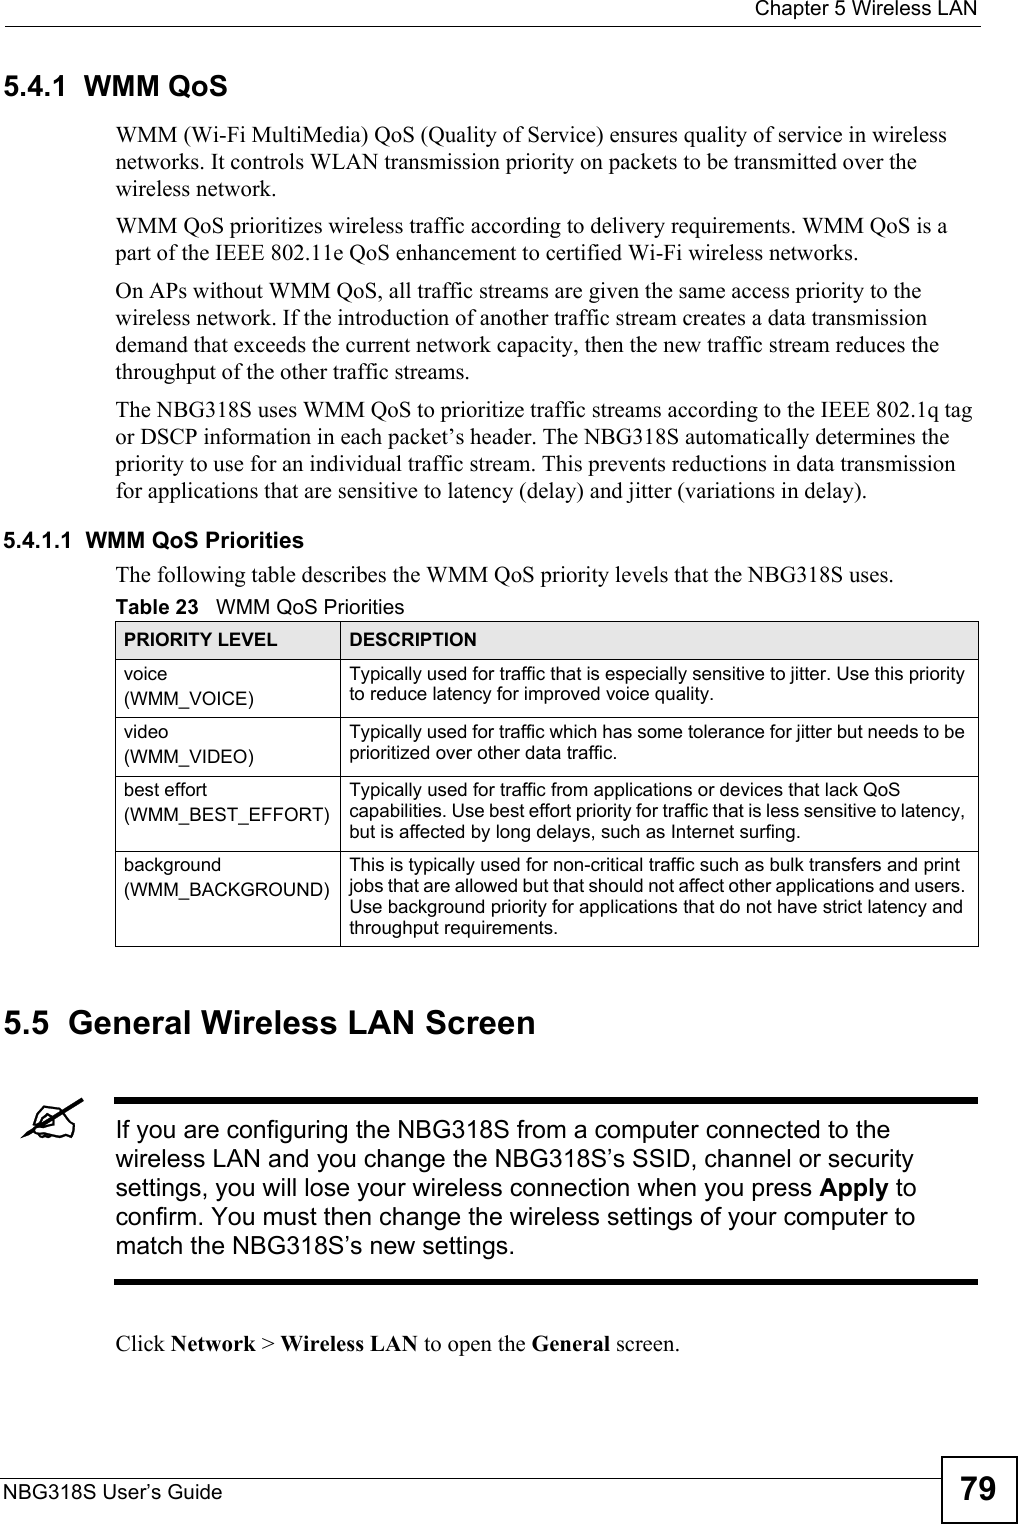  Chapter 5 Wireless LANNBG318S User’s Guide 795.4.1  WMM QoSWMM (Wi-Fi MultiMedia) QoS (Quality of Service) ensures quality of service in wireless networks. It controls WLAN transmission priority on packets to be transmitted over the wireless network.WMM QoS prioritizes wireless traffic according to delivery requirements. WMM QoS is a part of the IEEE 802.11e QoS enhancement to certified Wi-Fi wireless networks.On APs without WMM QoS, all traffic streams are given the same access priority to the wireless network. If the introduction of another traffic stream creates a data transmission demand that exceeds the current network capacity, then the new traffic stream reduces the throughput of the other traffic streams.The NBG318S uses WMM QoS to prioritize traffic streams according to the IEEE 802.1q tag or DSCP information in each packet’s header. The NBG318S automatically determines the priority to use for an individual traffic stream. This prevents reductions in data transmission for applications that are sensitive to latency (delay) and jitter (variations in delay).5.4.1.1  WMM QoS PrioritiesThe following table describes the WMM QoS priority levels that the NBG318S uses.5.5  General Wireless LAN Screen &quot;If you are configuring the NBG318S from a computer connected to the wireless LAN and you change the NBG318S’s SSID, channel or security settings, you will lose your wireless connection when you press Apply to confirm. You must then change the wireless settings of your computer to match the NBG318S’s new settings.Click Network &gt; Wireless LAN to open the General screen.Table 23   WMM QoS PrioritiesPRIORITY LEVEL DESCRIPTIONvoice(WMM_VOICE)Typically used for traffic that is especially sensitive to jitter. Use this priority to reduce latency for improved voice quality.video(WMM_VIDEO)Typically used for traffic which has some tolerance for jitter but needs to be prioritized over other data traffic.best effort(WMM_BEST_EFFORT)Typically used for traffic from applications or devices that lack QoS capabilities. Use best effort priority for traffic that is less sensitive to latency, but is affected by long delays, such as Internet surfing.background(WMM_BACKGROUND)This is typically used for non-critical traffic such as bulk transfers and print jobs that are allowed but that should not affect other applications and users. Use background priority for applications that do not have strict latency and throughput requirements.